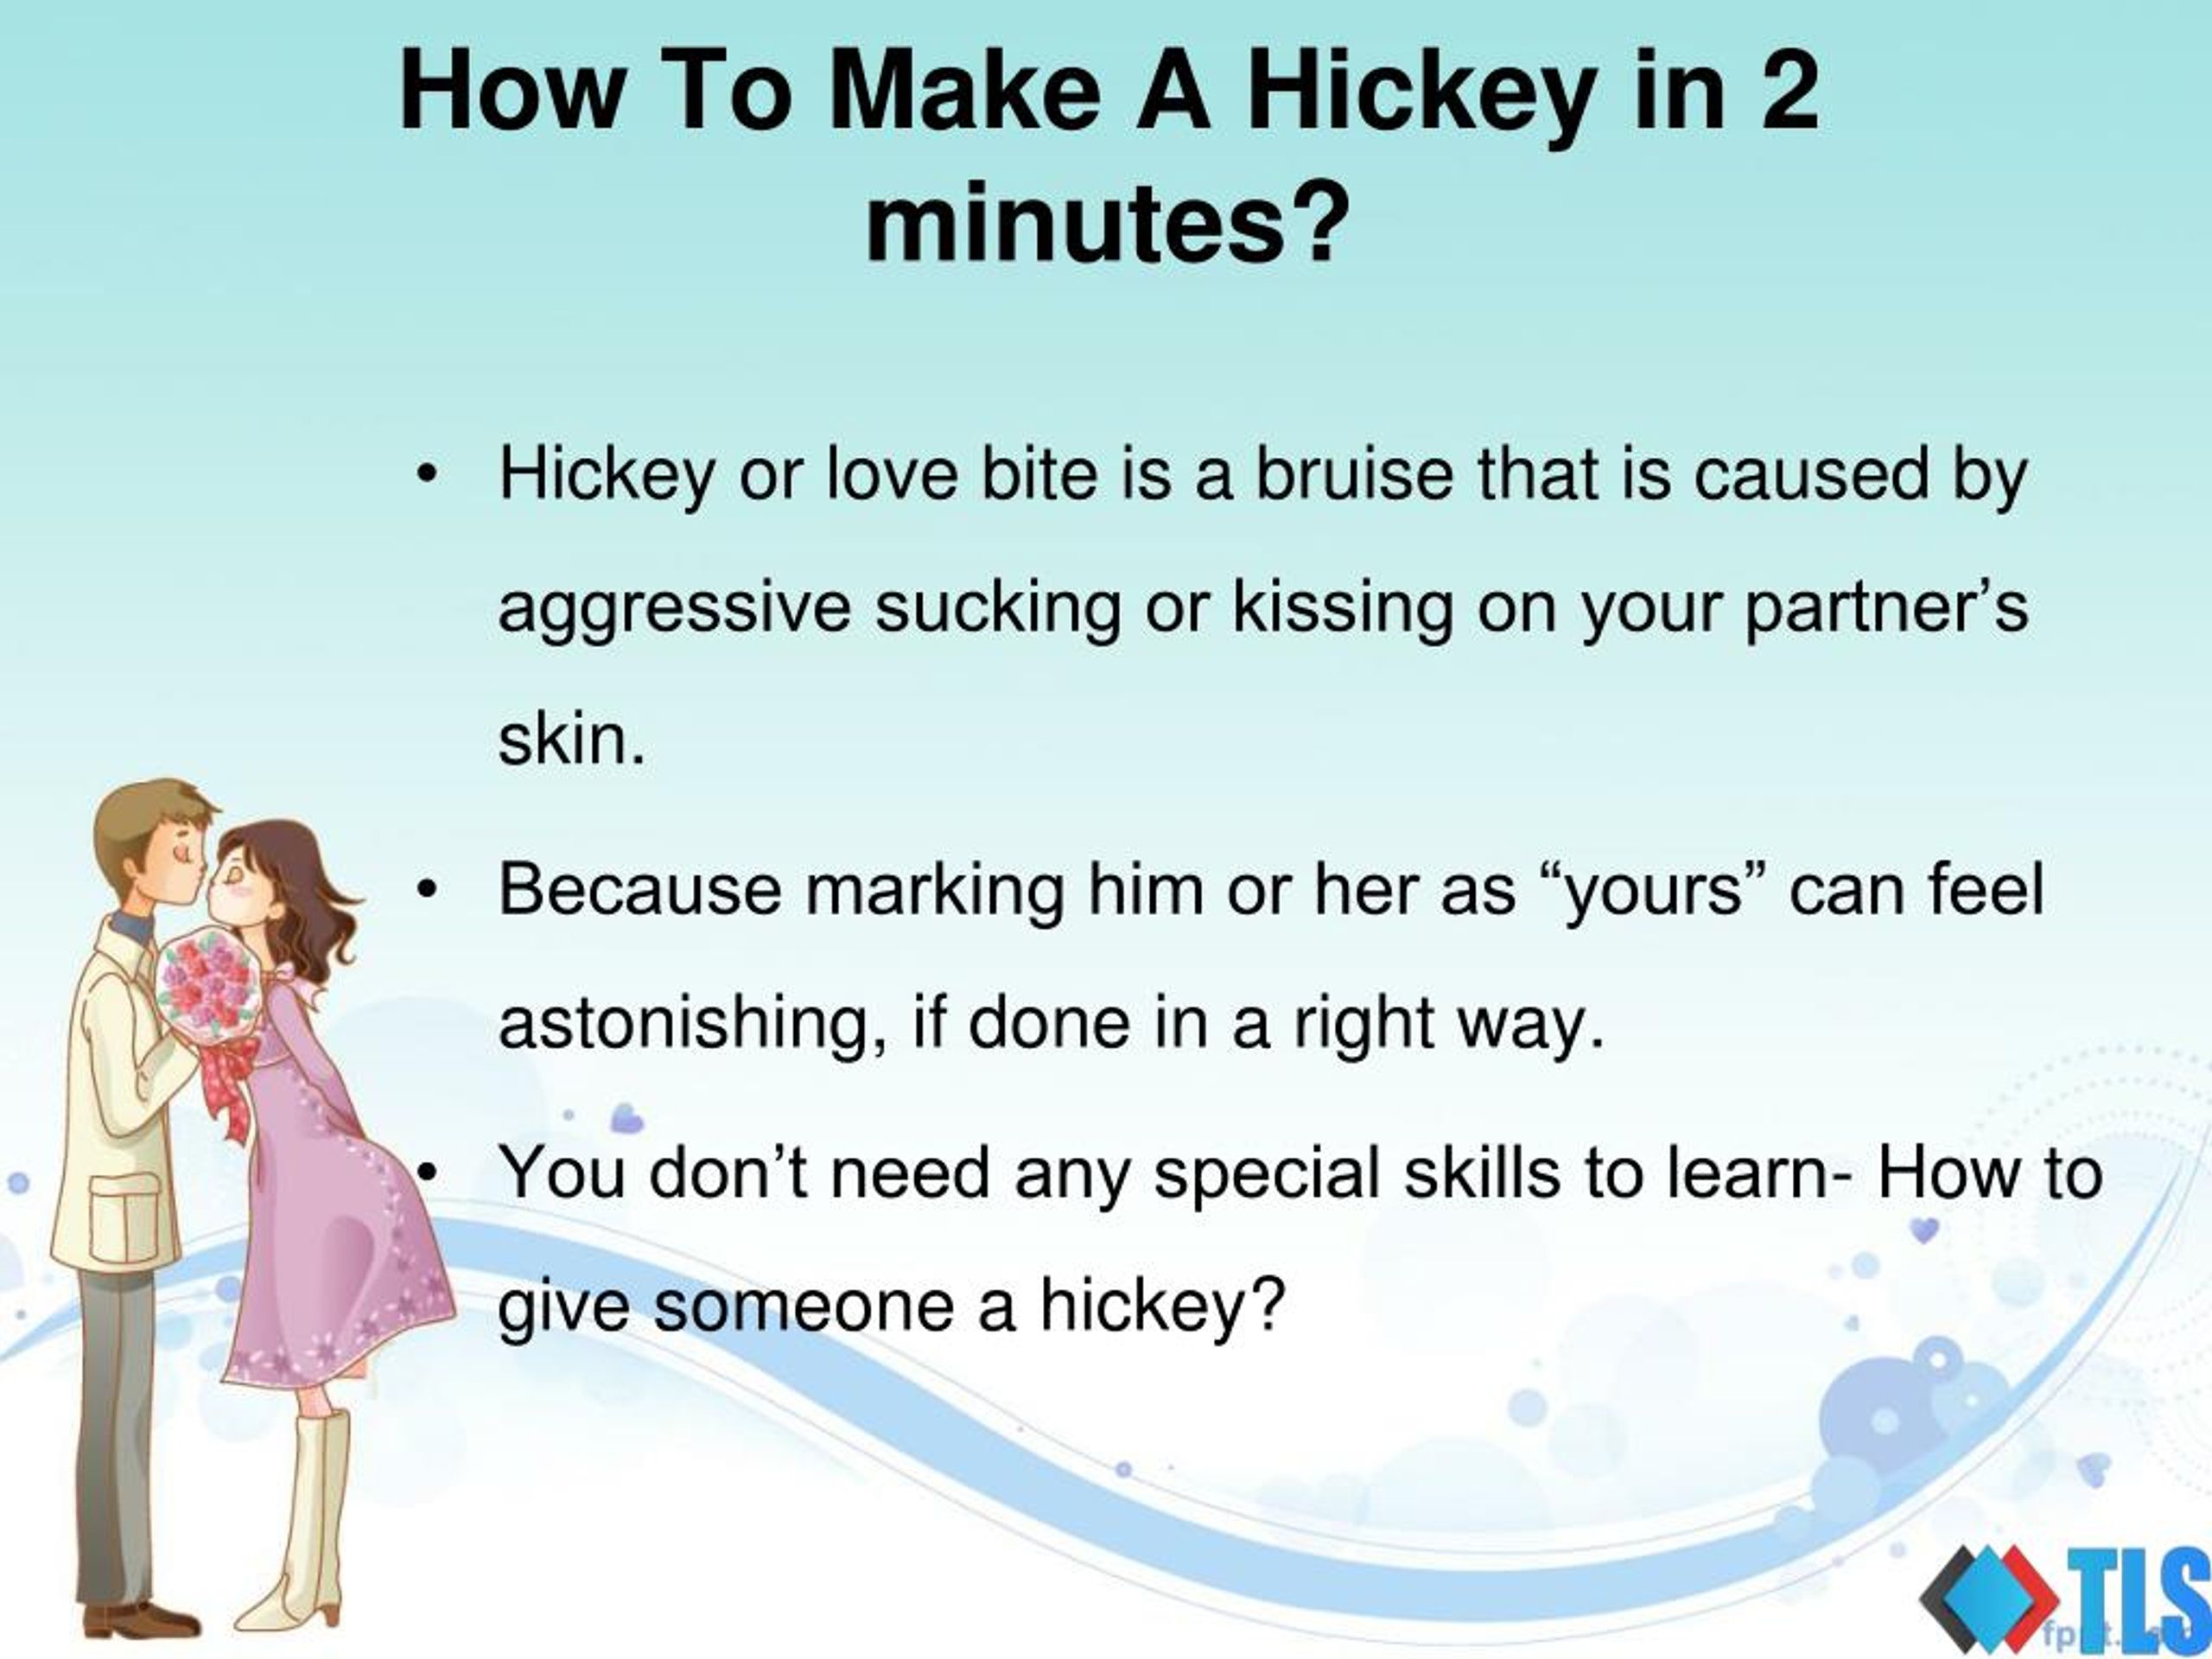 PPT - How To Give A Hickey - In 7 Simple Steps To Mark Him/H